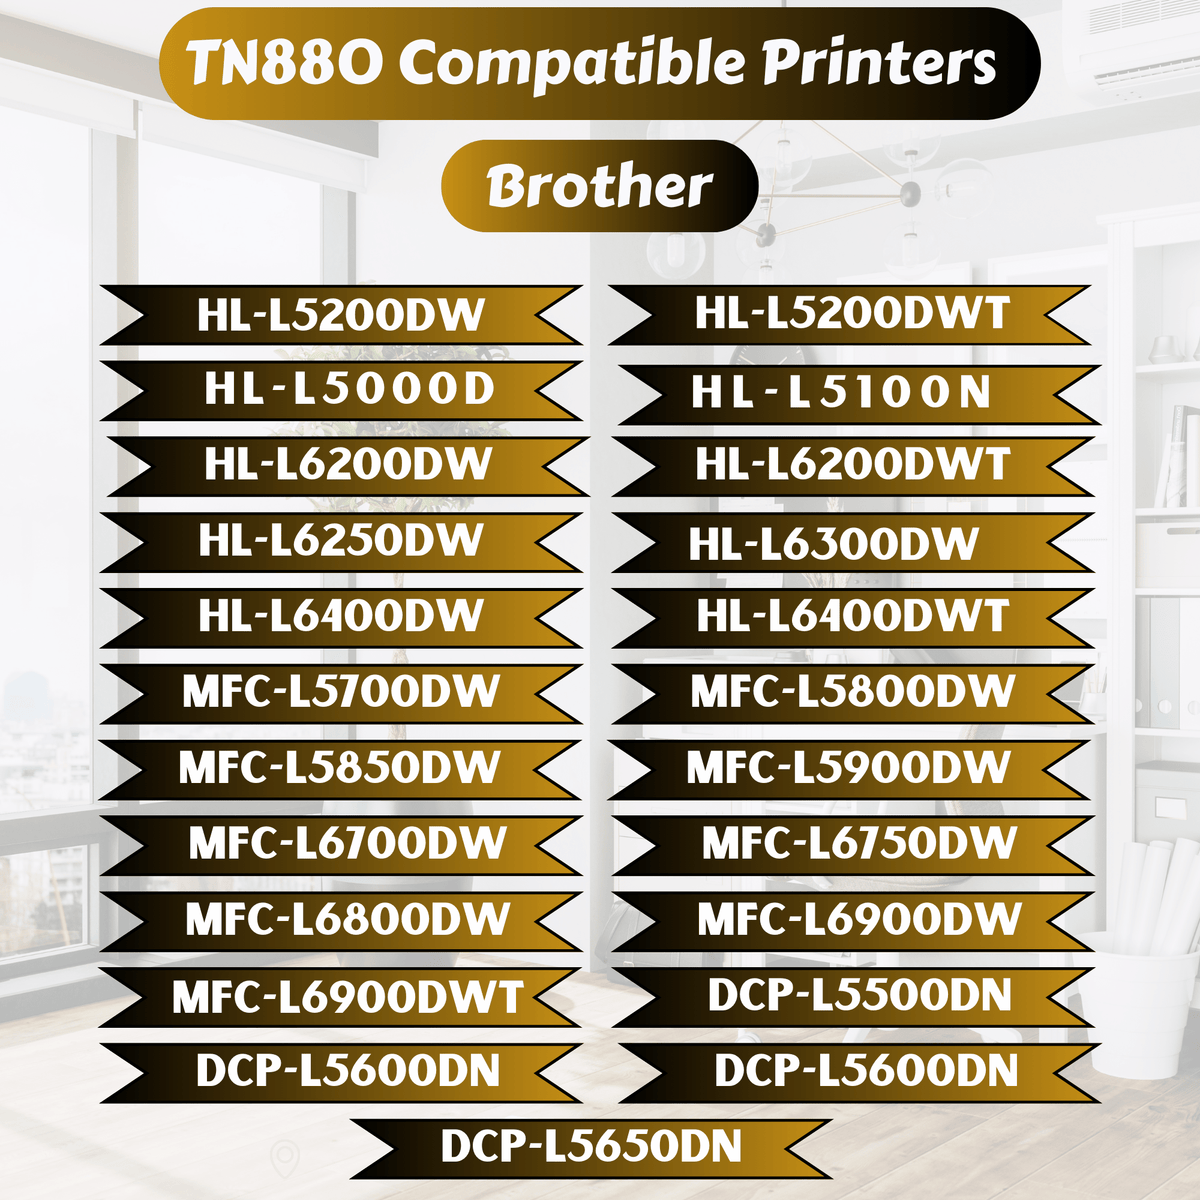 TN880 Compatible 2 Toner Cartridges TN 880 for Brother HL MFC & DCP Series L5000 L5100 L5200 L6200 L6250 L6300 L6400 L5700 L5800 L5850 L5900 L6700 L6750 L6800 L6900 L5500 L5600 L5650 PRINTOXE Toner Cartridges